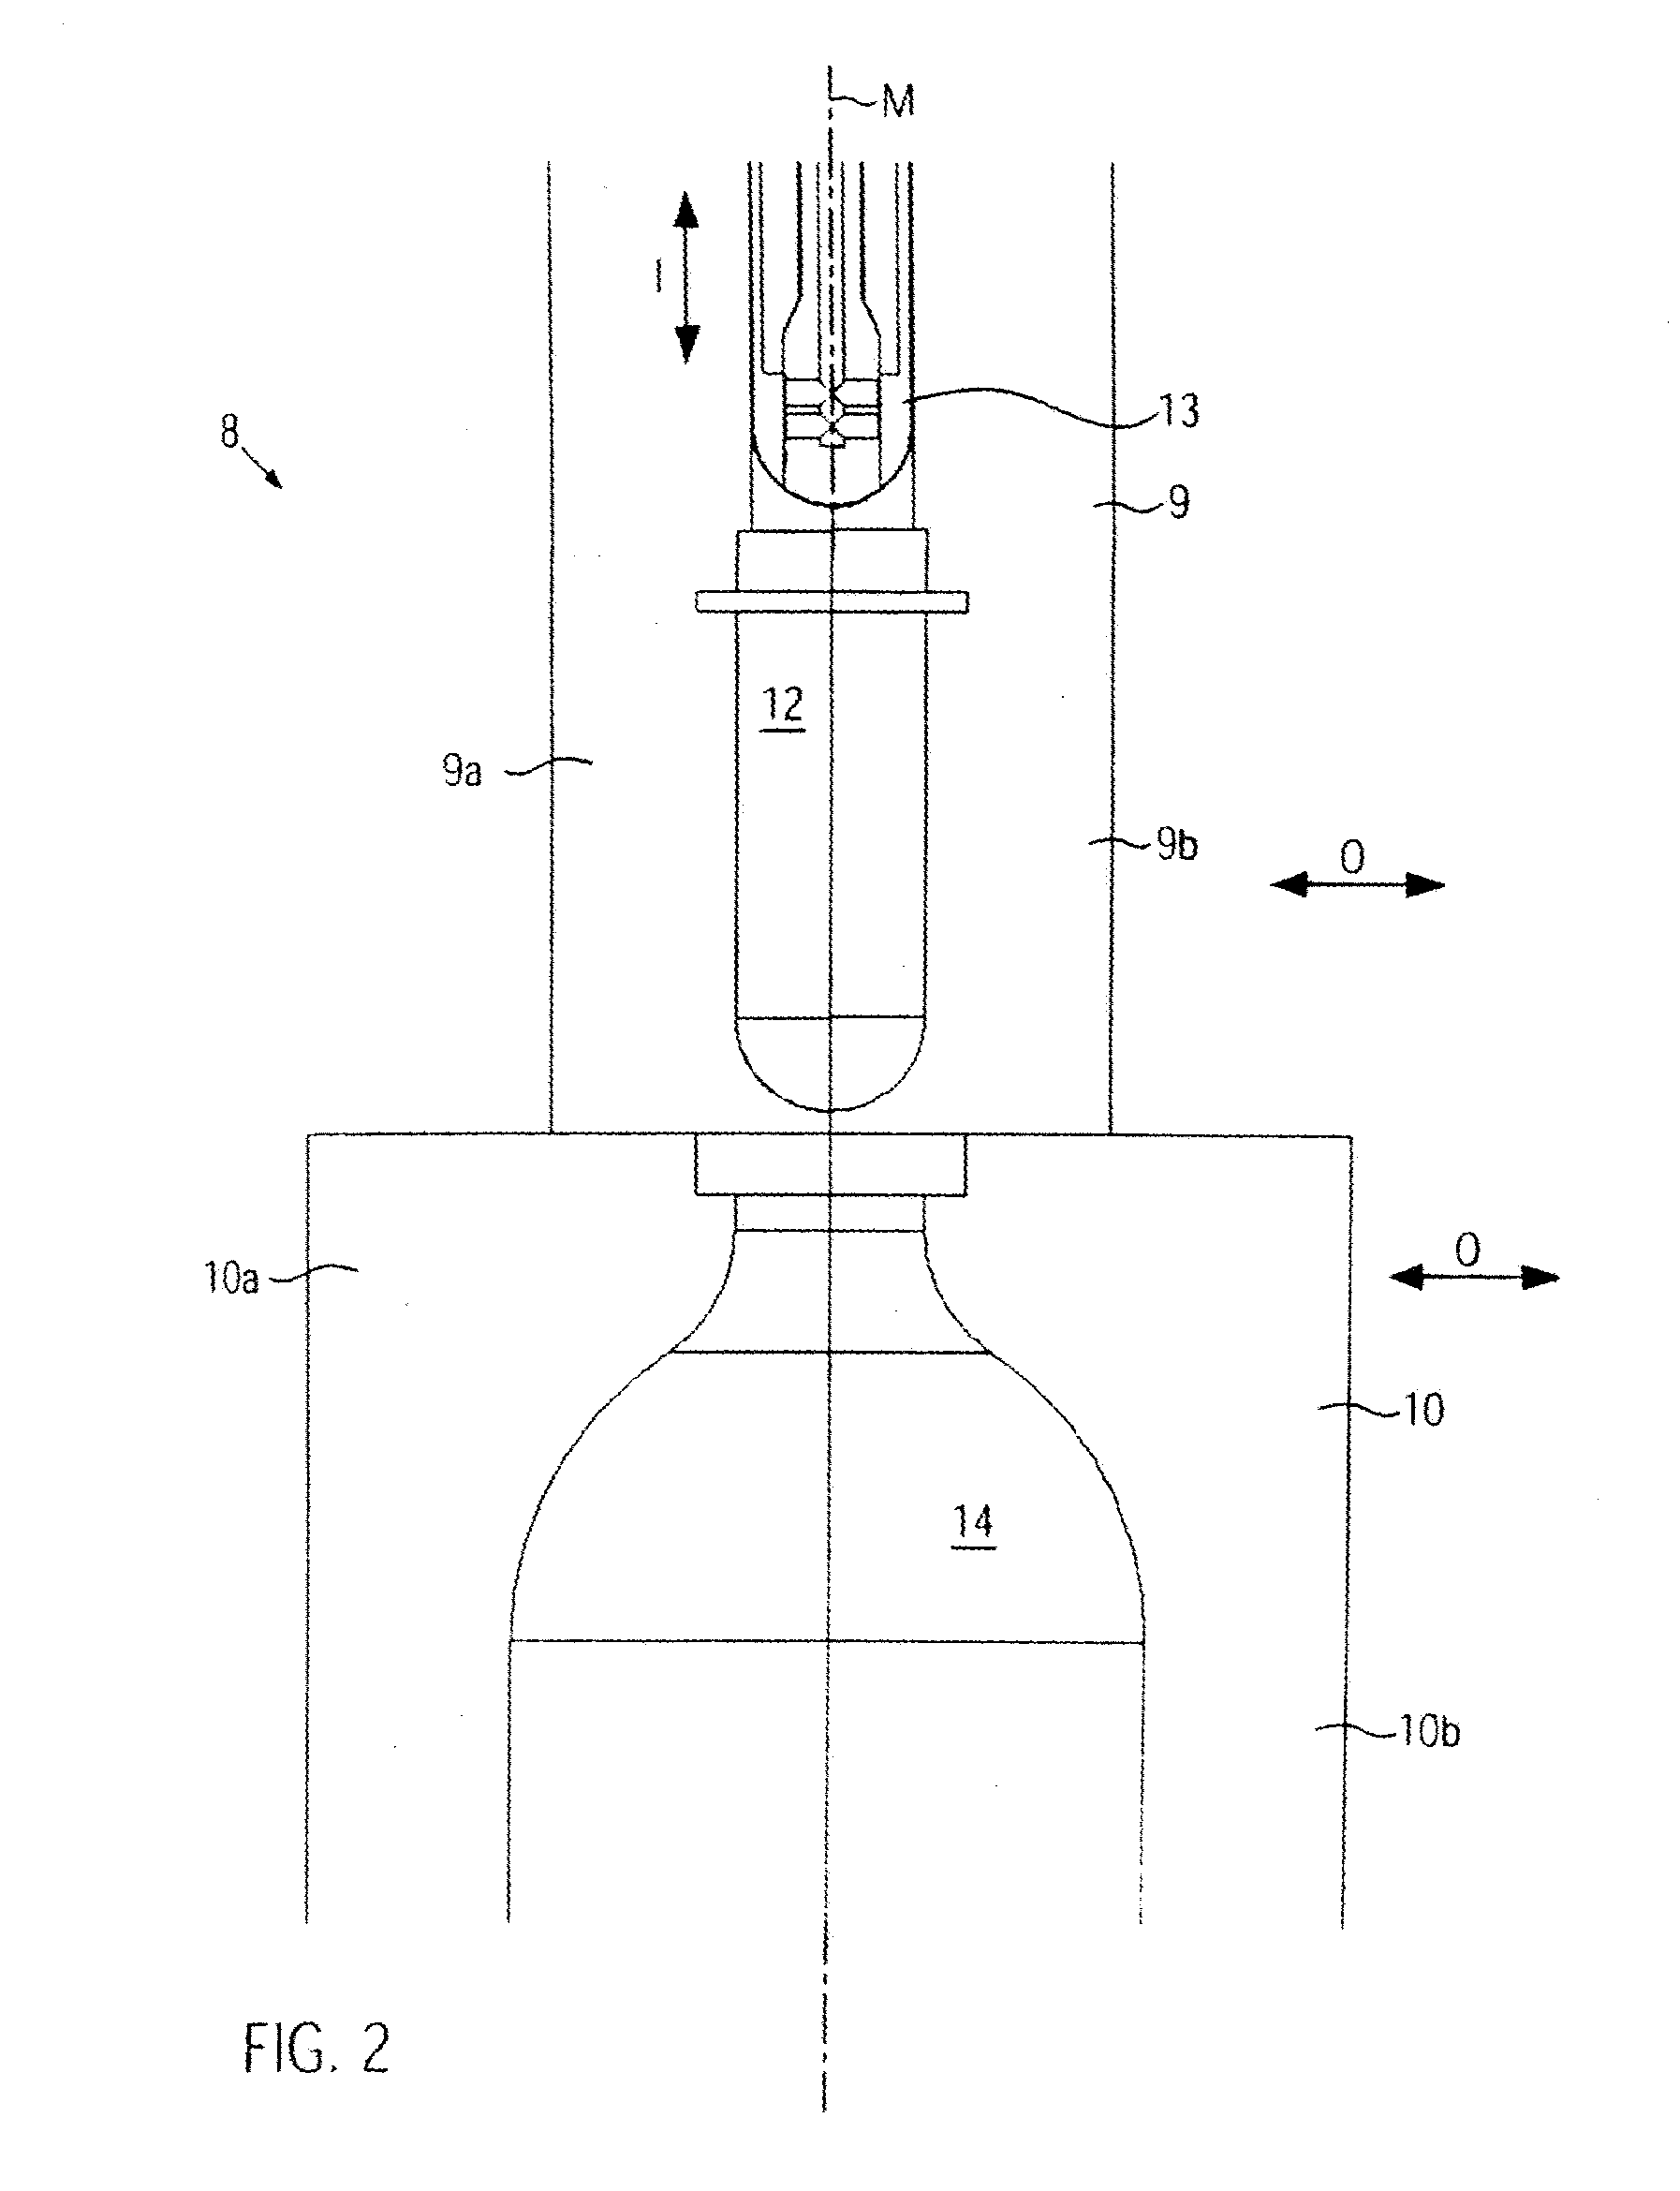 Device and Method for Manufacturing Plastic Containers